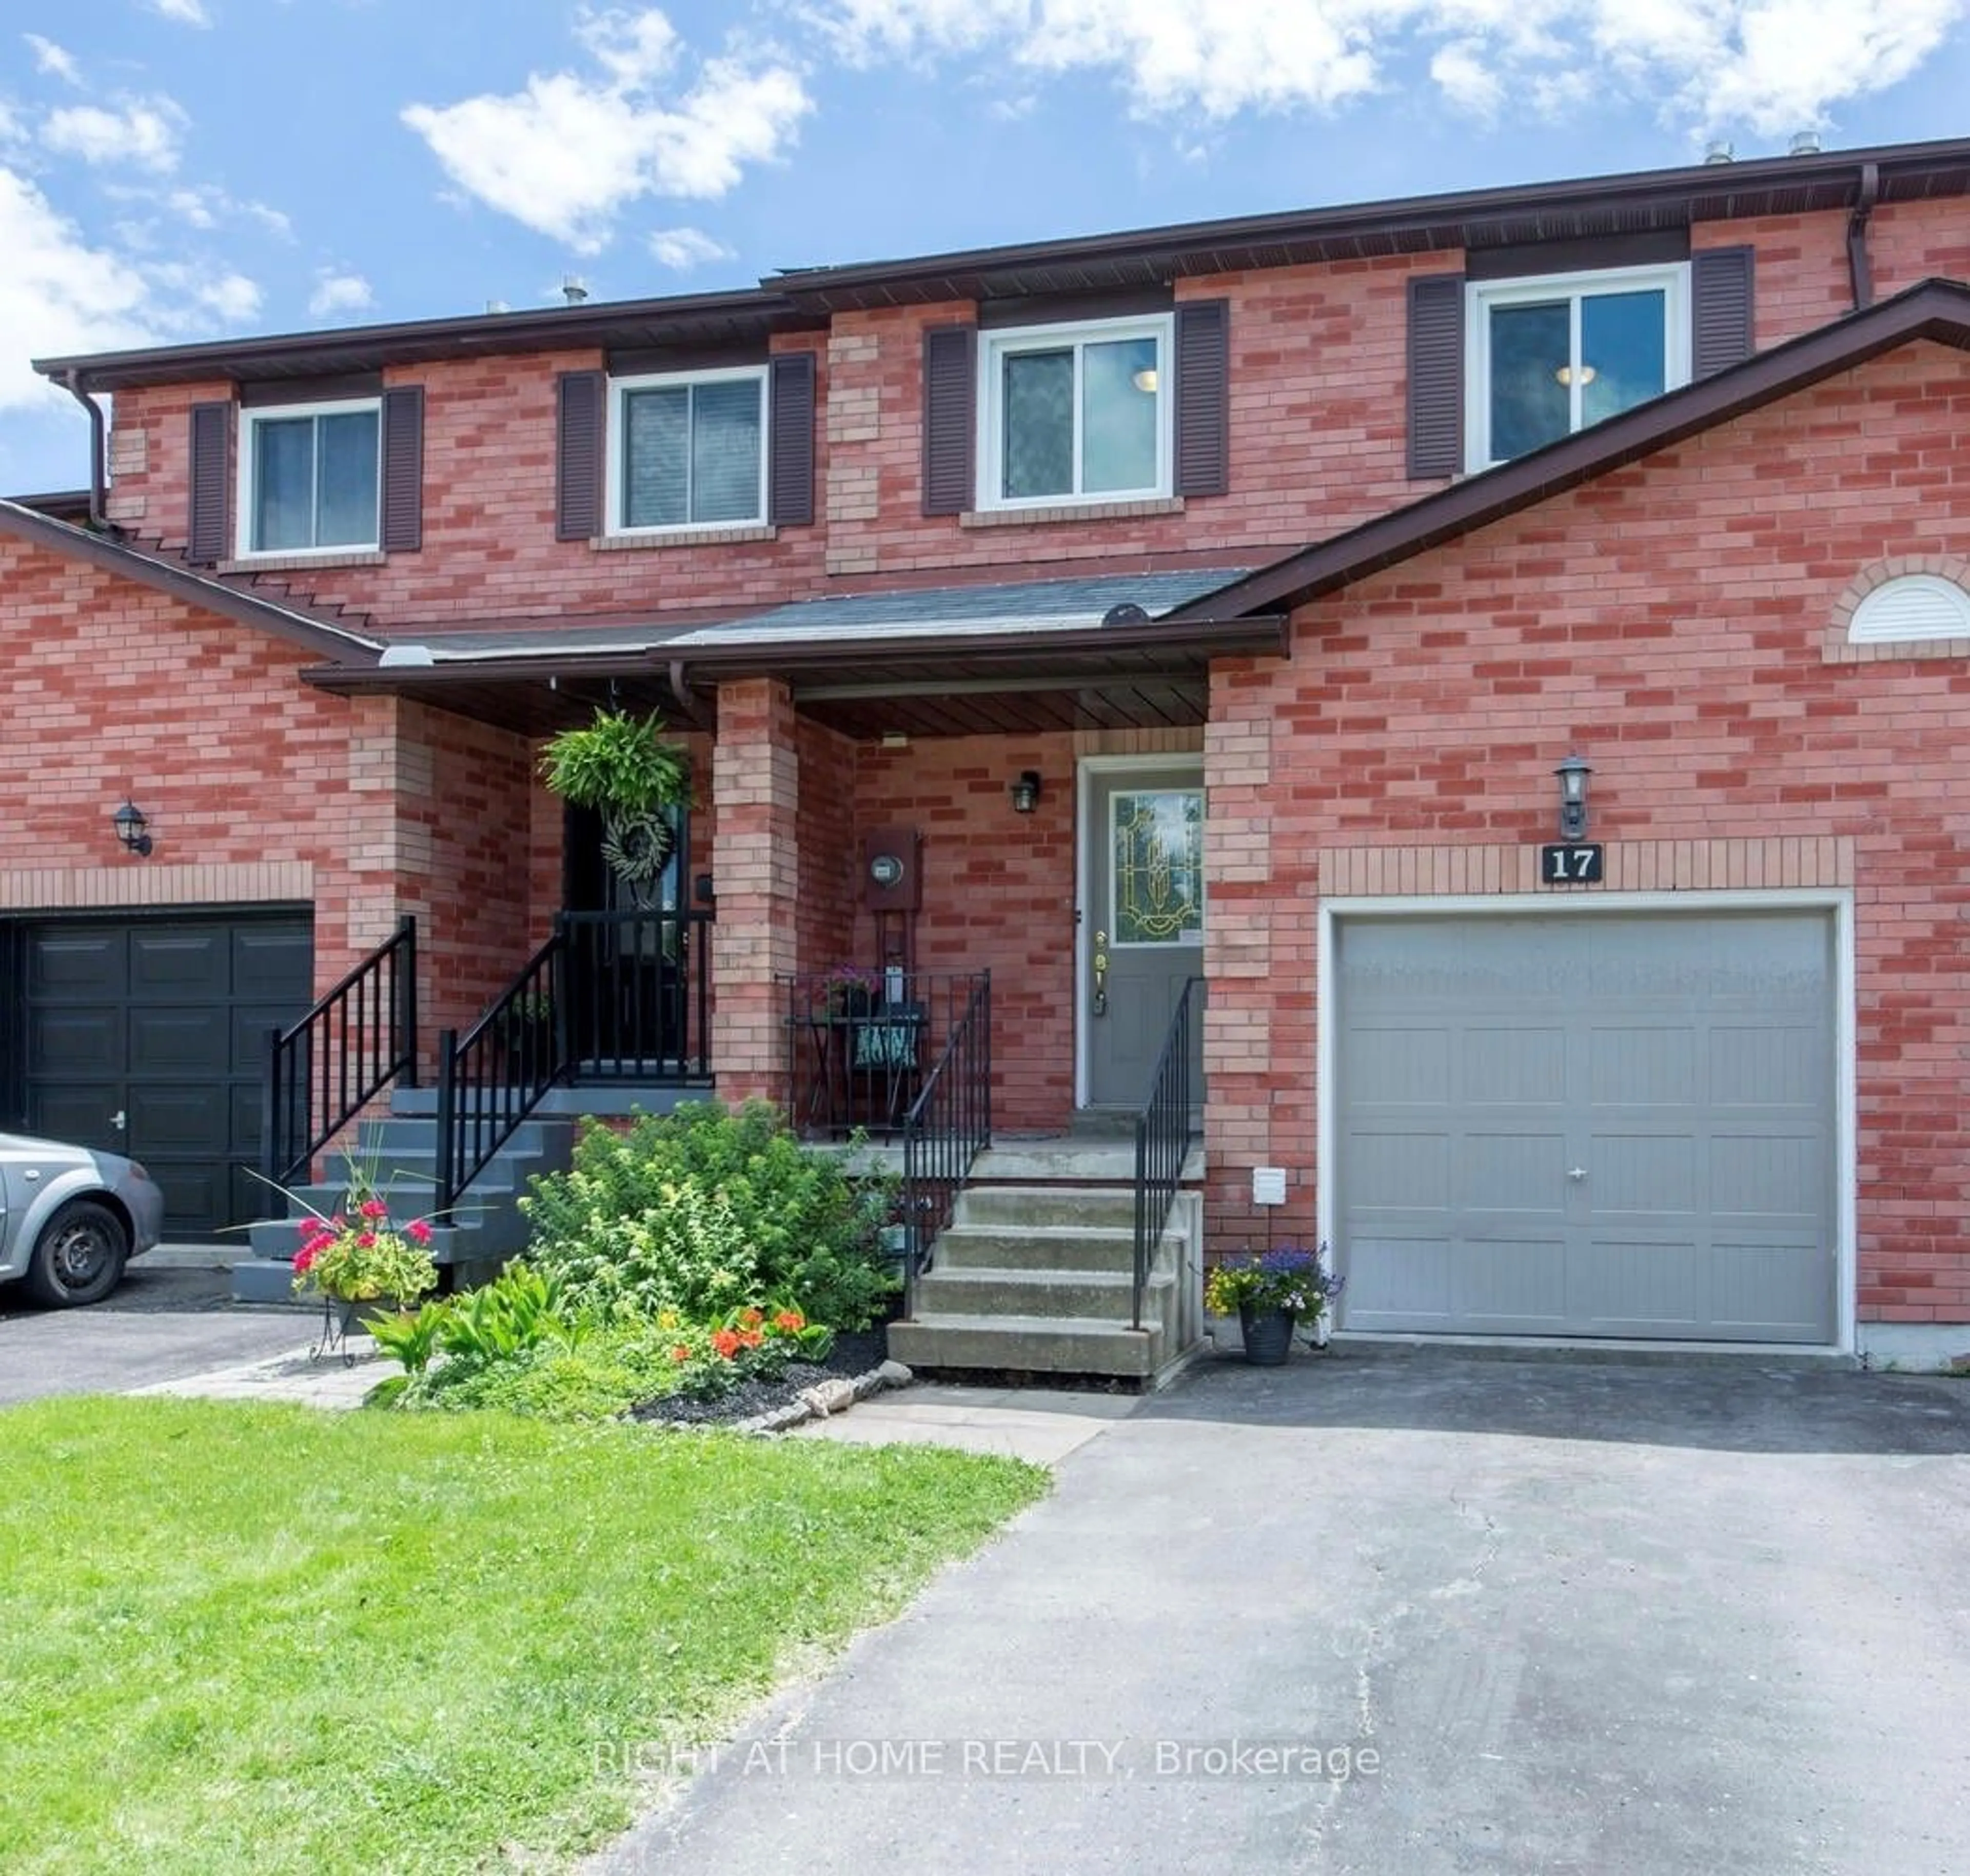 Home with brick exterior material for 17 Chance Crt, Clarington Ontario L1C 4S4